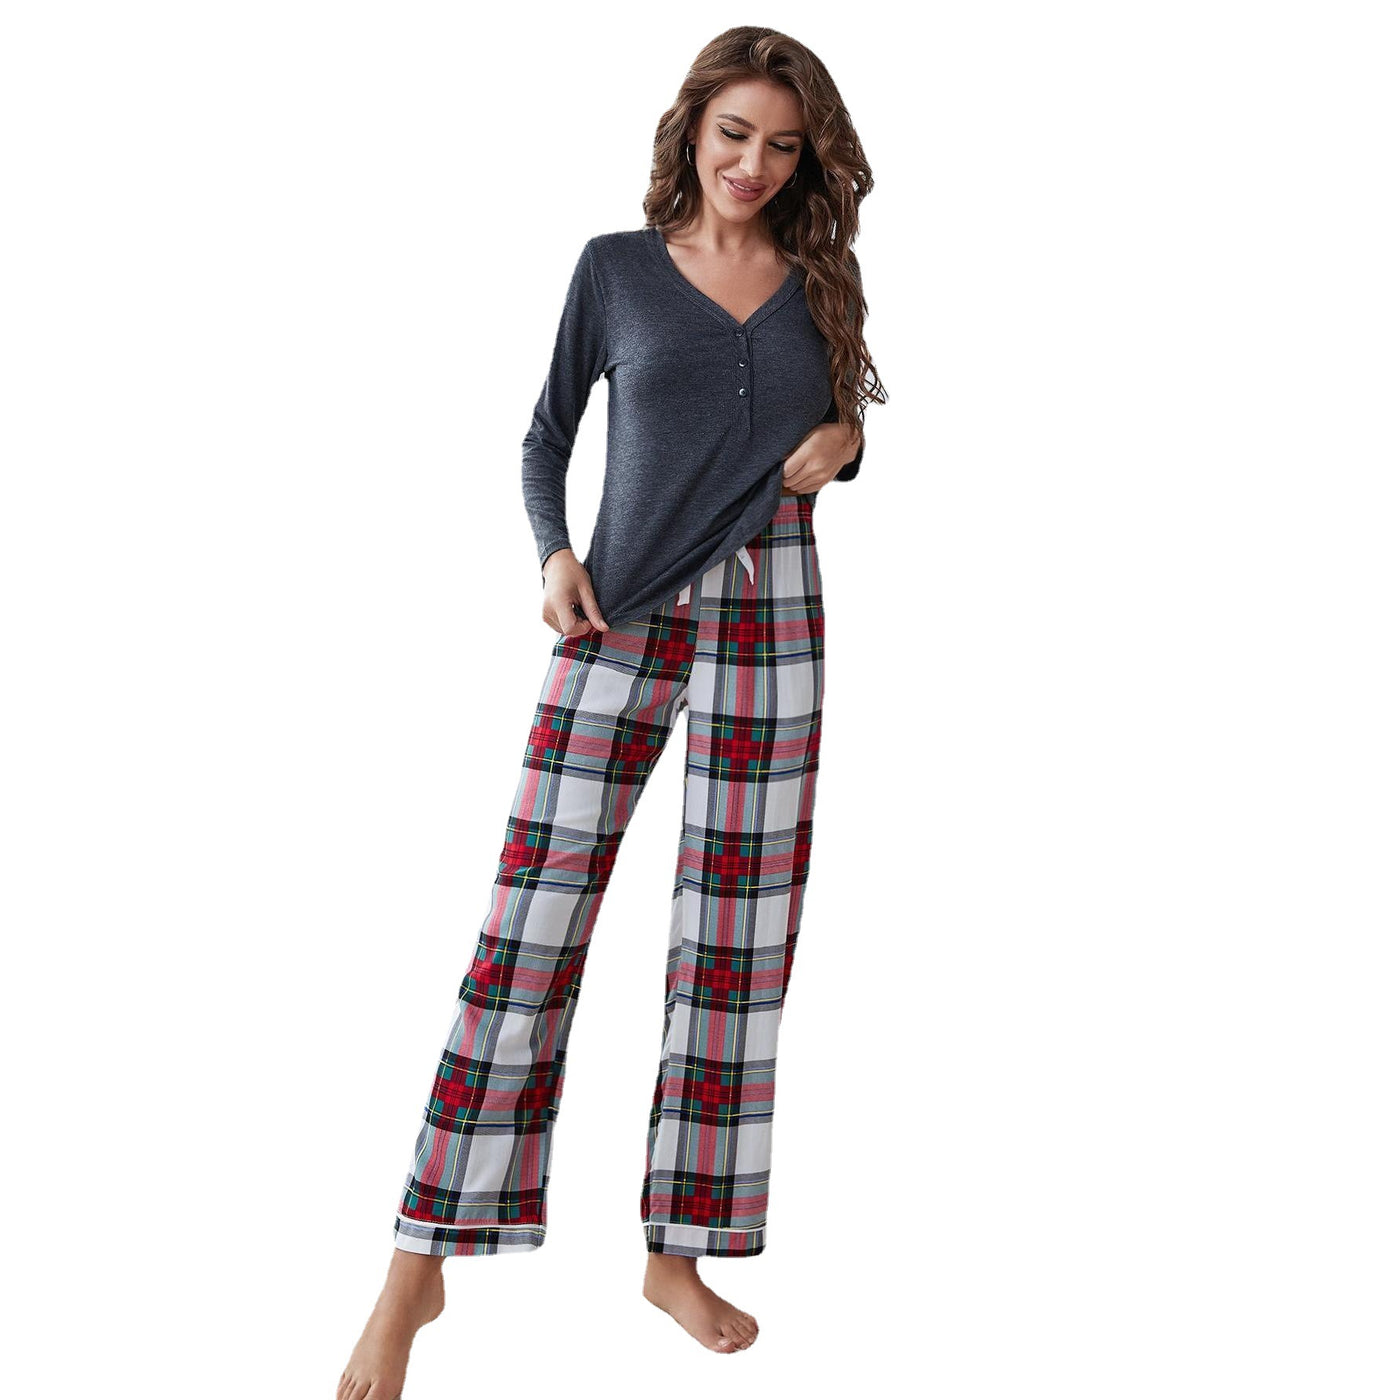 Solid Color Long Sleeve Top and Plaid Bottoms Pajama Set